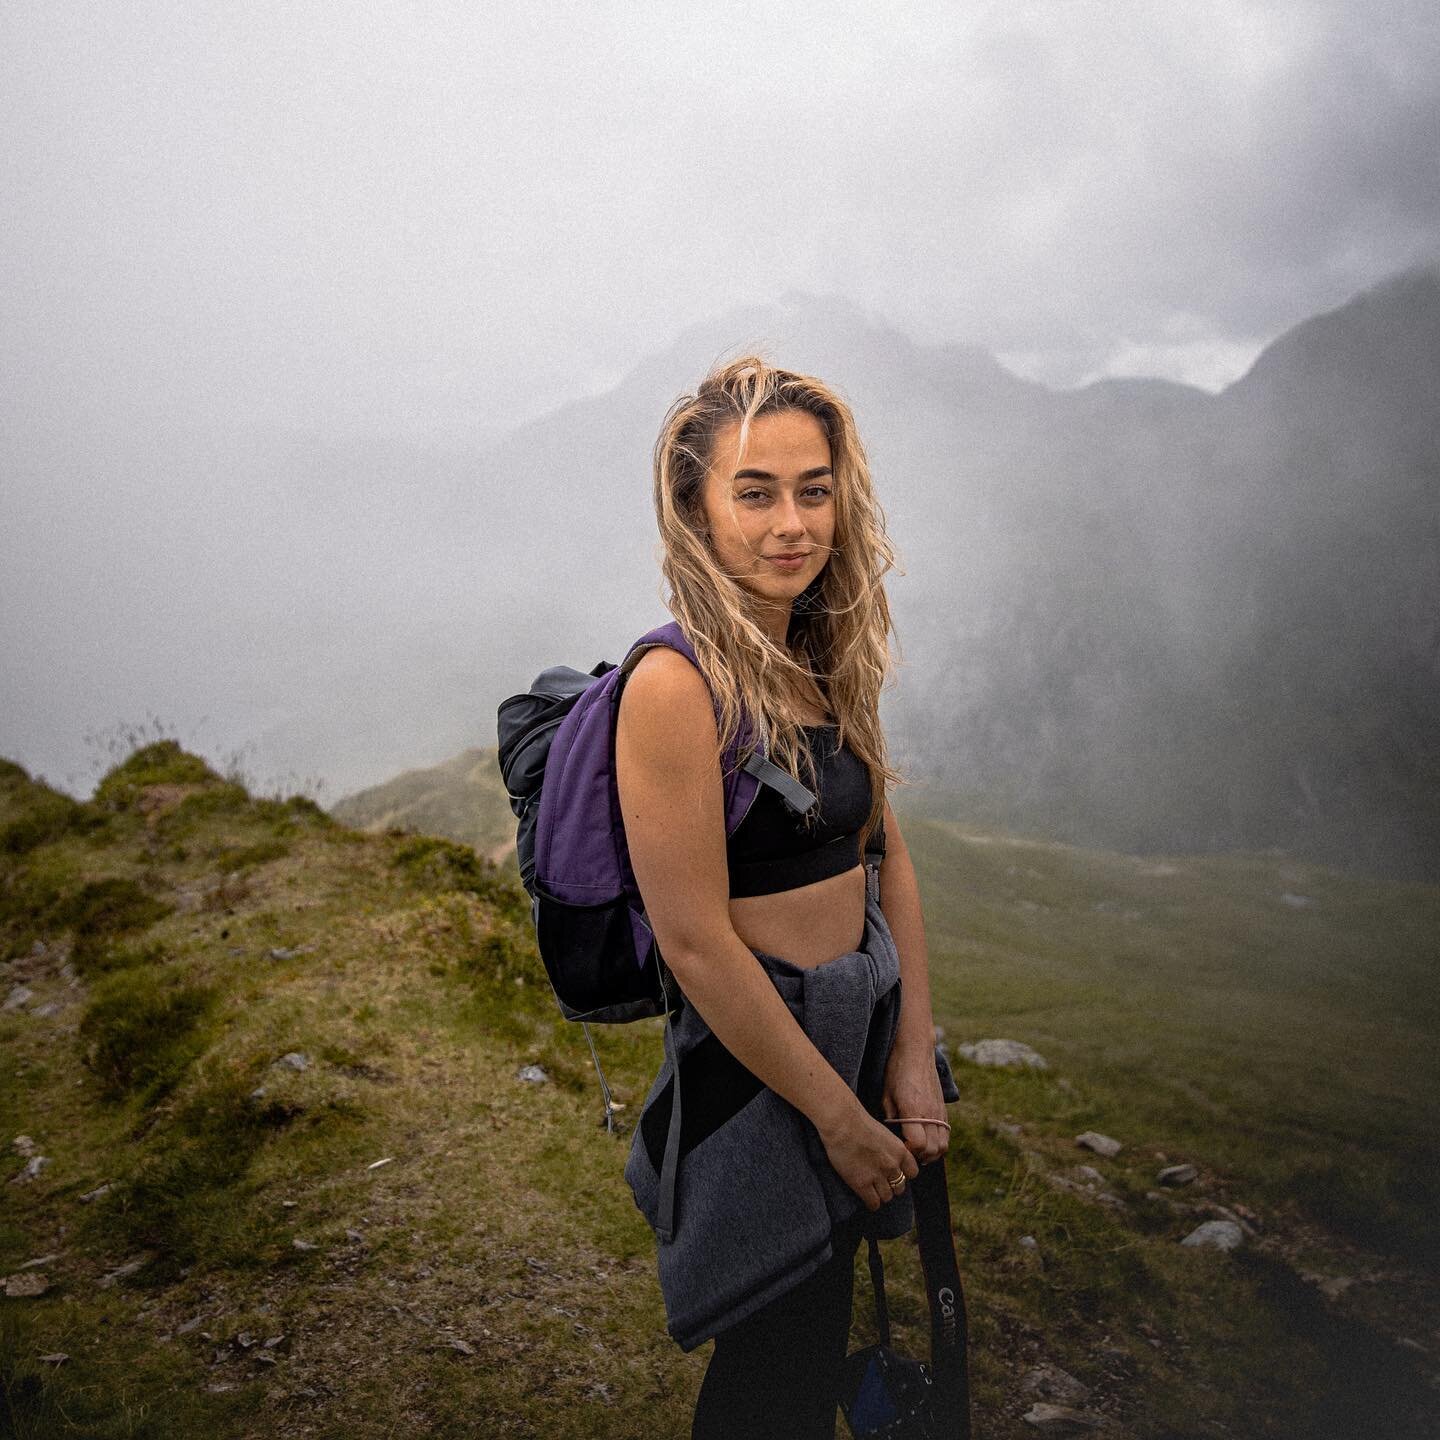 Forever being greeted by stunning, clear views on Y Garn 😂🏔 One day, I will manage to see this view in all its glory. Although moody cloud summits are the one for photography ☁️📸
-
Behind the camera: @bearingeast 
Edit: @kateamandaexplores 
.
.
.
